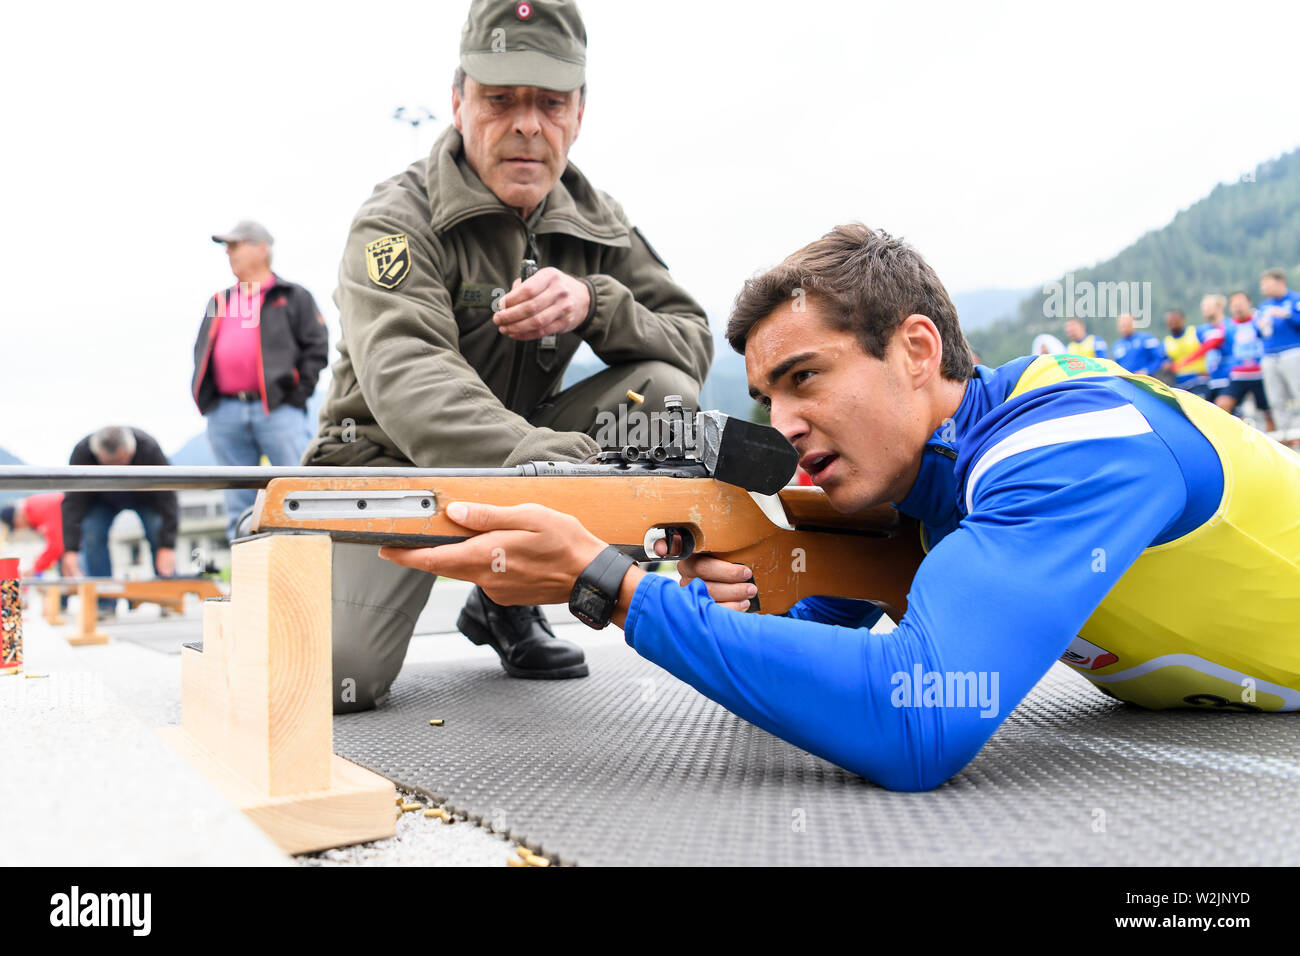 Teambuilding at afterwithtag in biathlon stadium. Dirk Carlson (KSC) at the shooting range. GES / football / 2nd Bundesliga: training camp of the Karlsruhe Sports Club in Waidring, 07/09/2019 Football / Soccer: 2nd League: training camp Karlsruher SC, Waidring, Austria, July 9, 2019 | usage worldwide Stock Photo